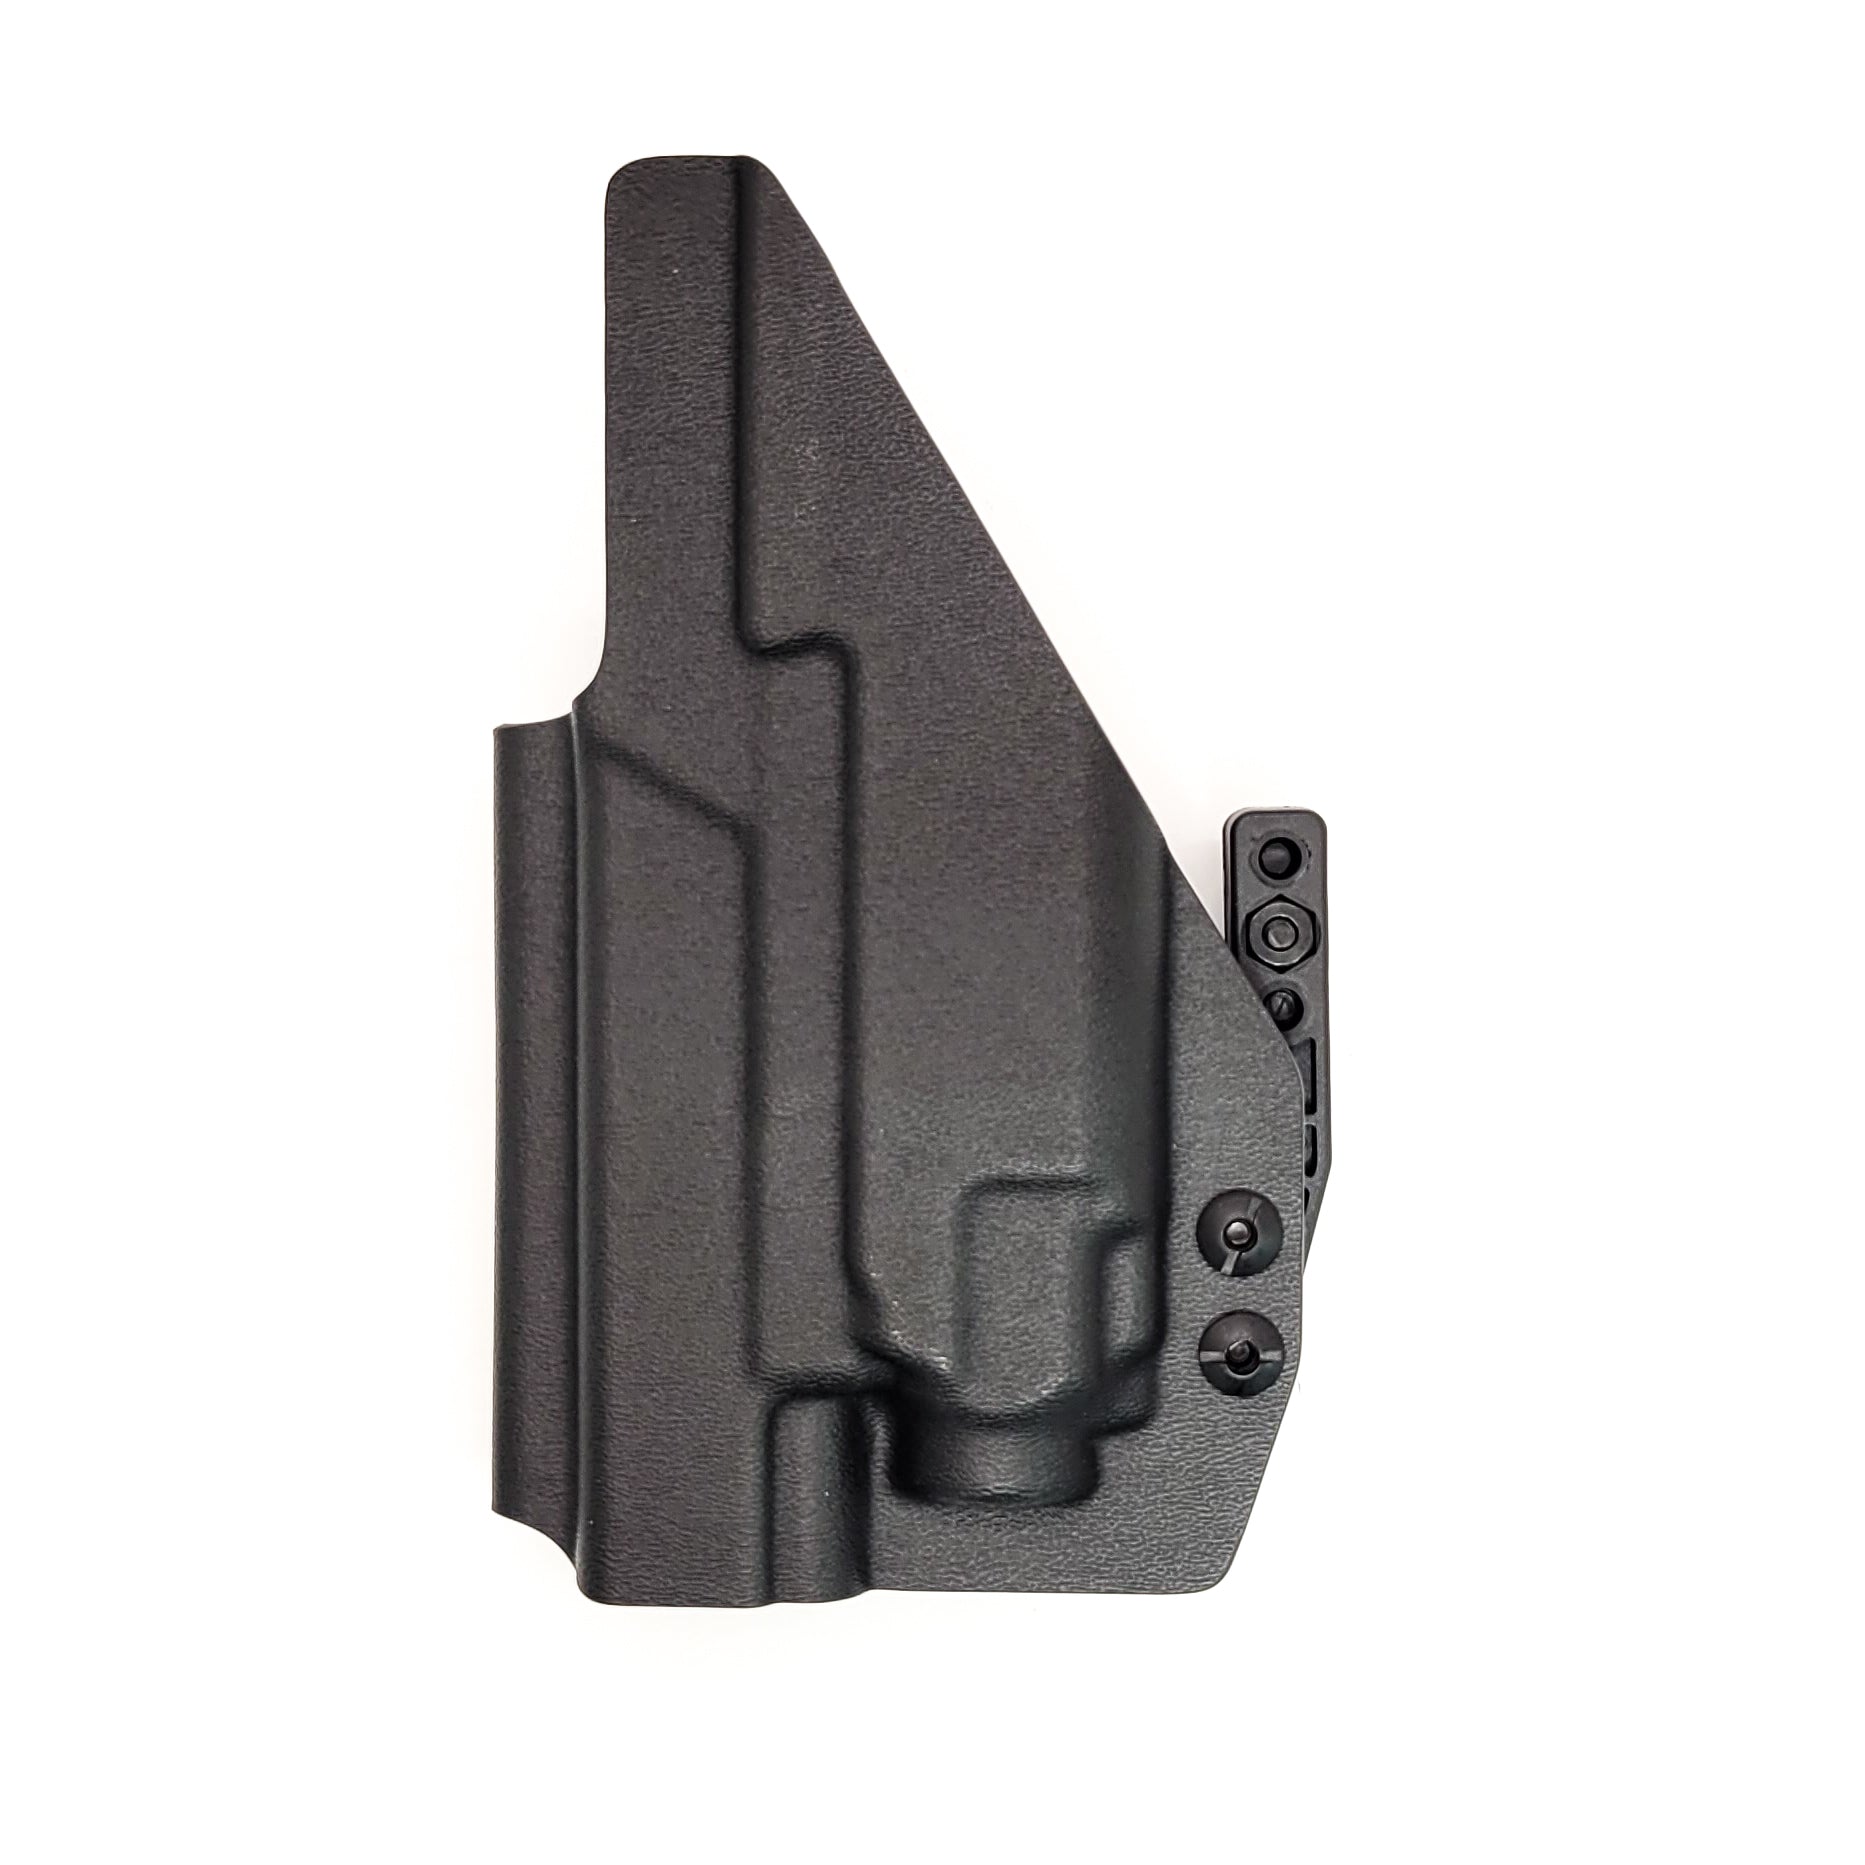 For the best Inside Waistband IWB AIWB Kydex Holster designed to fit the Glock 43X MOS, 48 MOS, 43X Rail, and 48 Rail pistols with Streamlight TLR-8 Sub, shop Four Brothers Holsters.  Full sweat guard, adjustable retention, smooth edges to reduce printing. Made in the USA. Open muzzle and cleared for red dot sights.